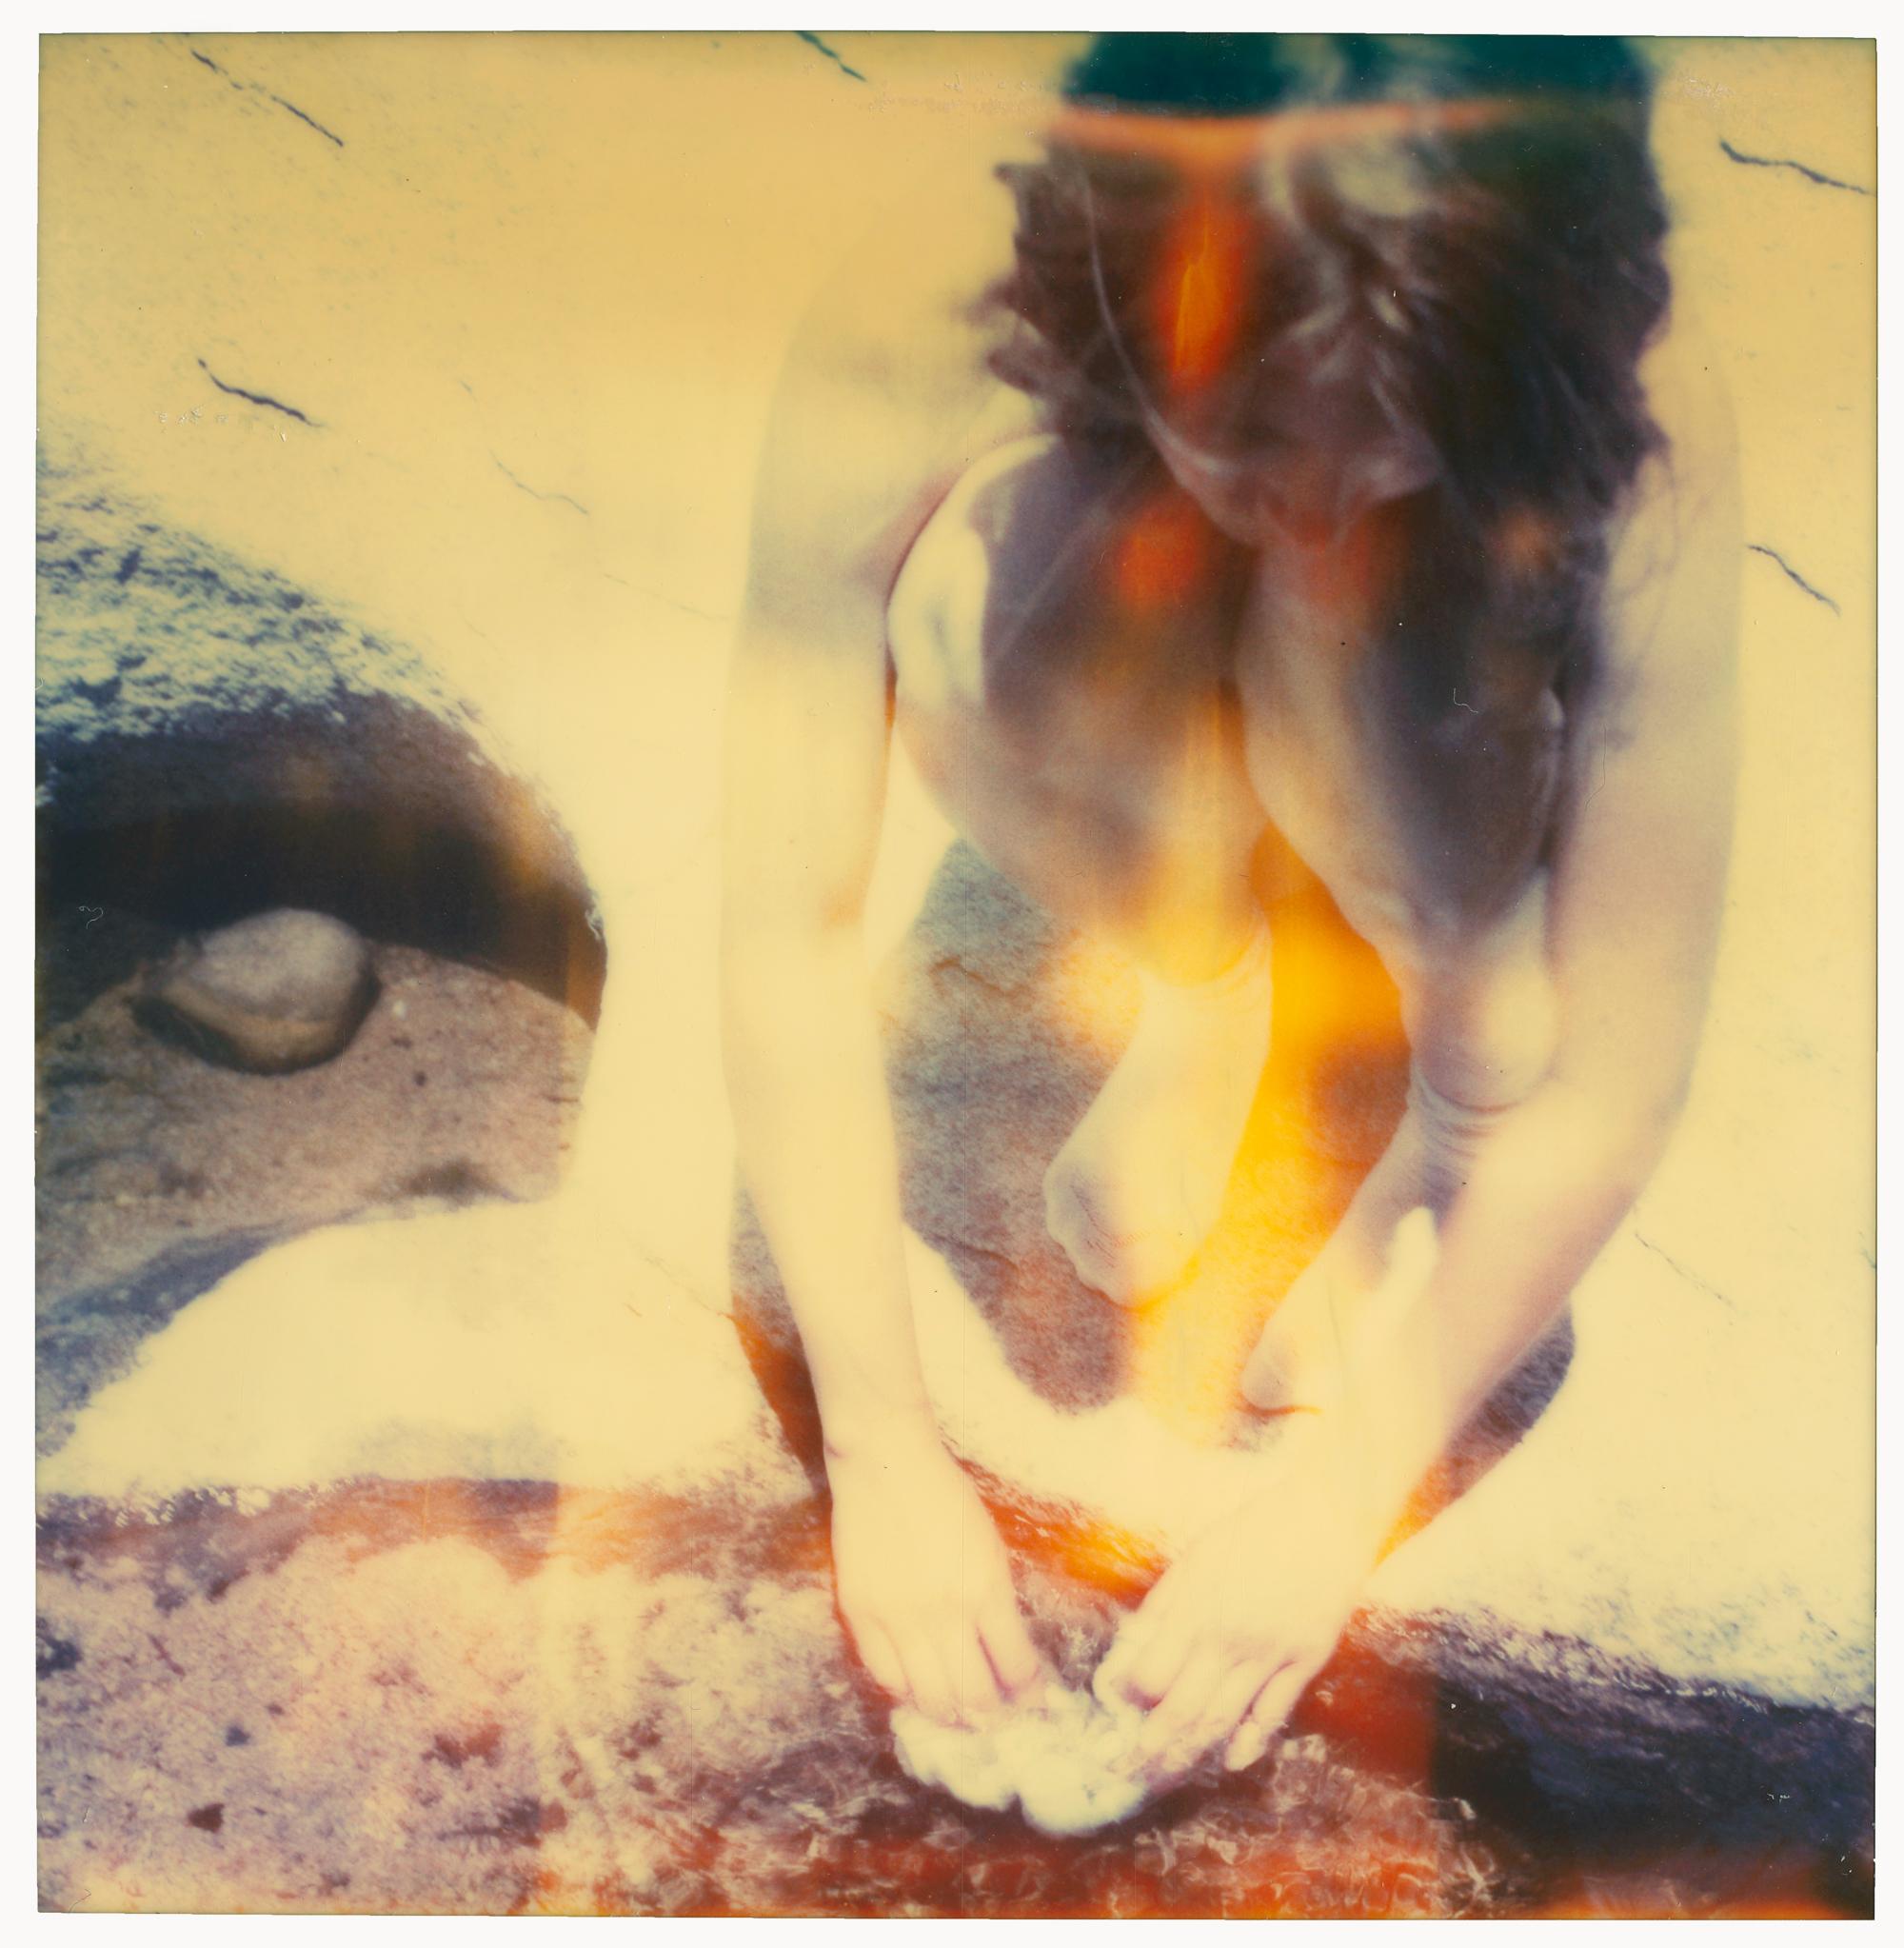 Stefanie Schneider Color Photograph - Waterhole - Planet of the Apes 05 - 21st Century, Polaroid, Abstract